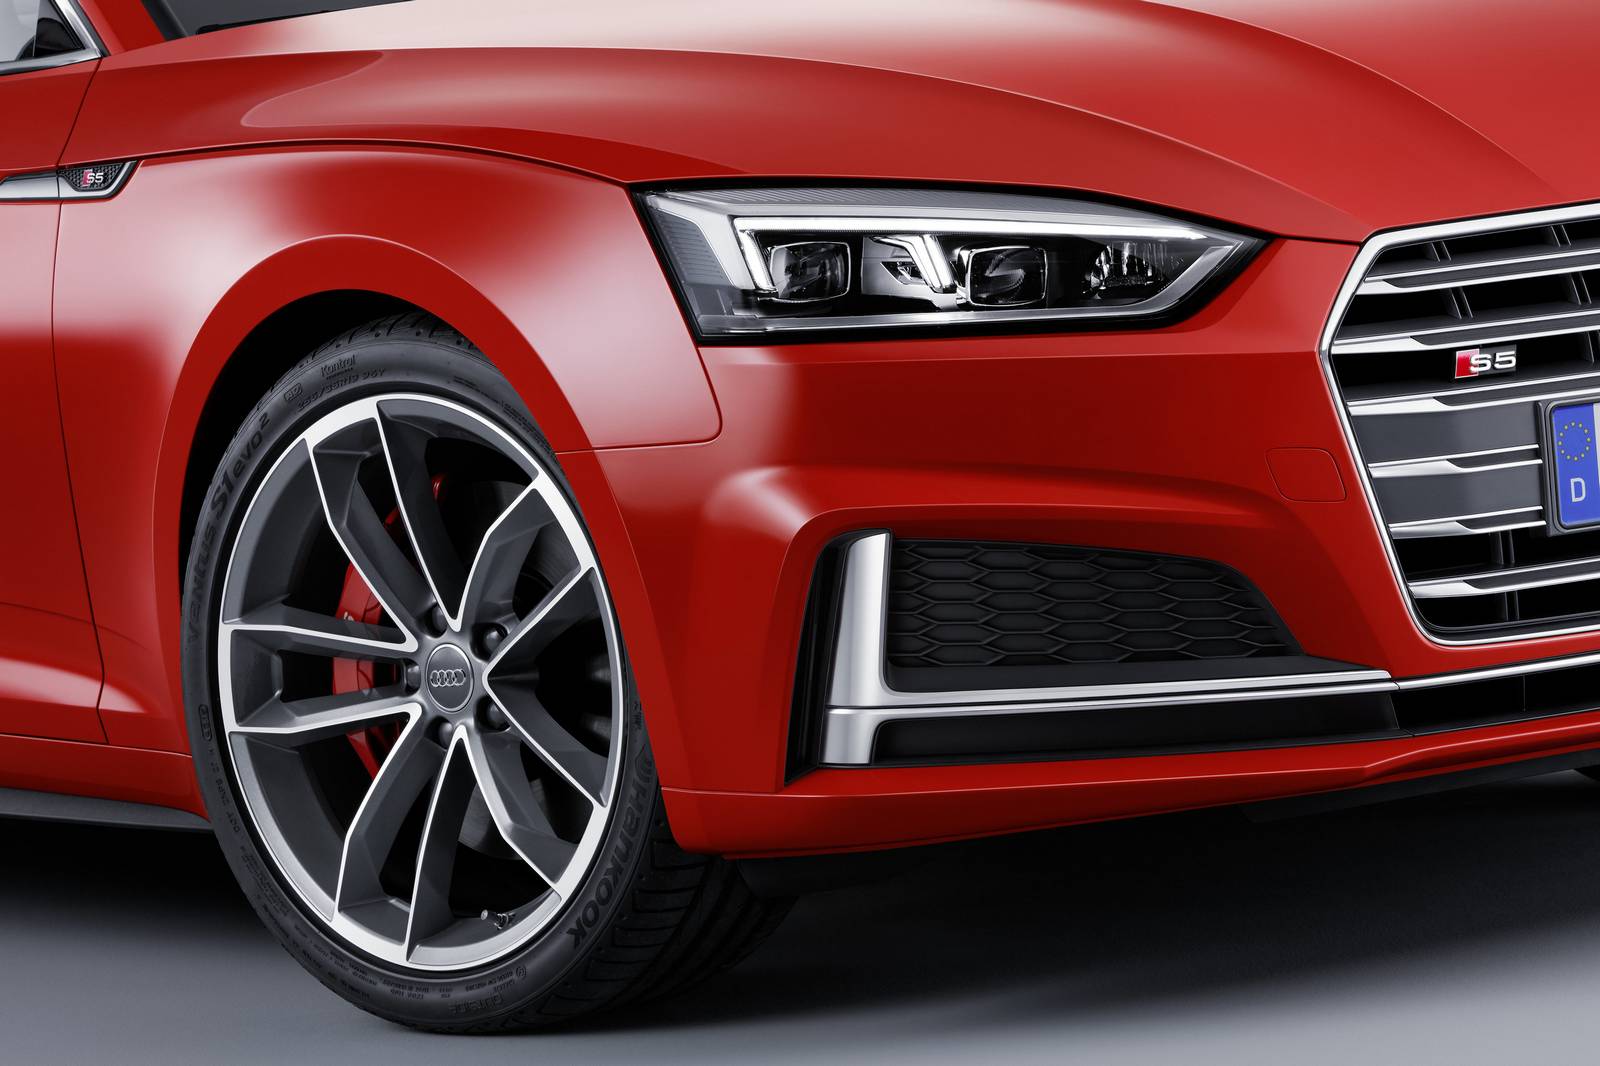 2017 Audi A5 and S5 Coupe Uncovered in Ingolstadt